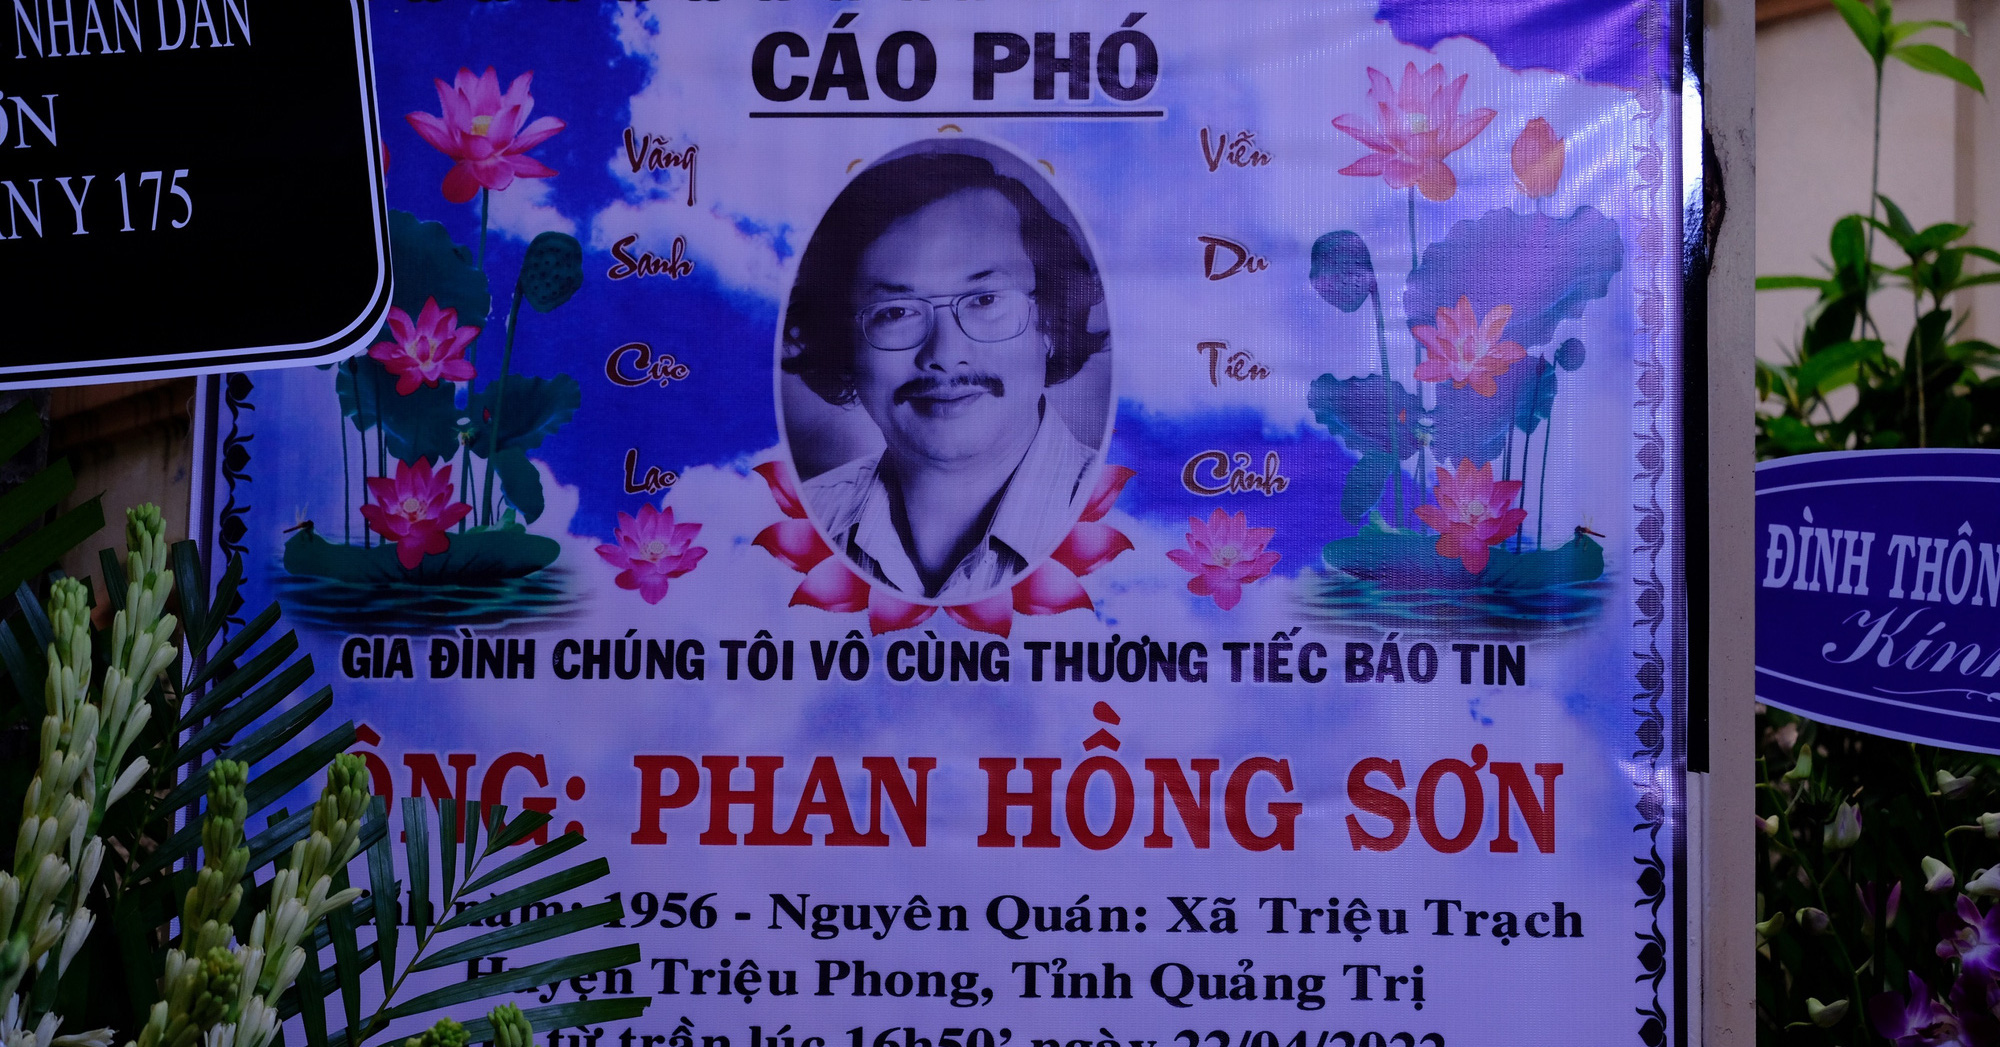 Sharing emotions from the family of the late musician Phan Hong Son